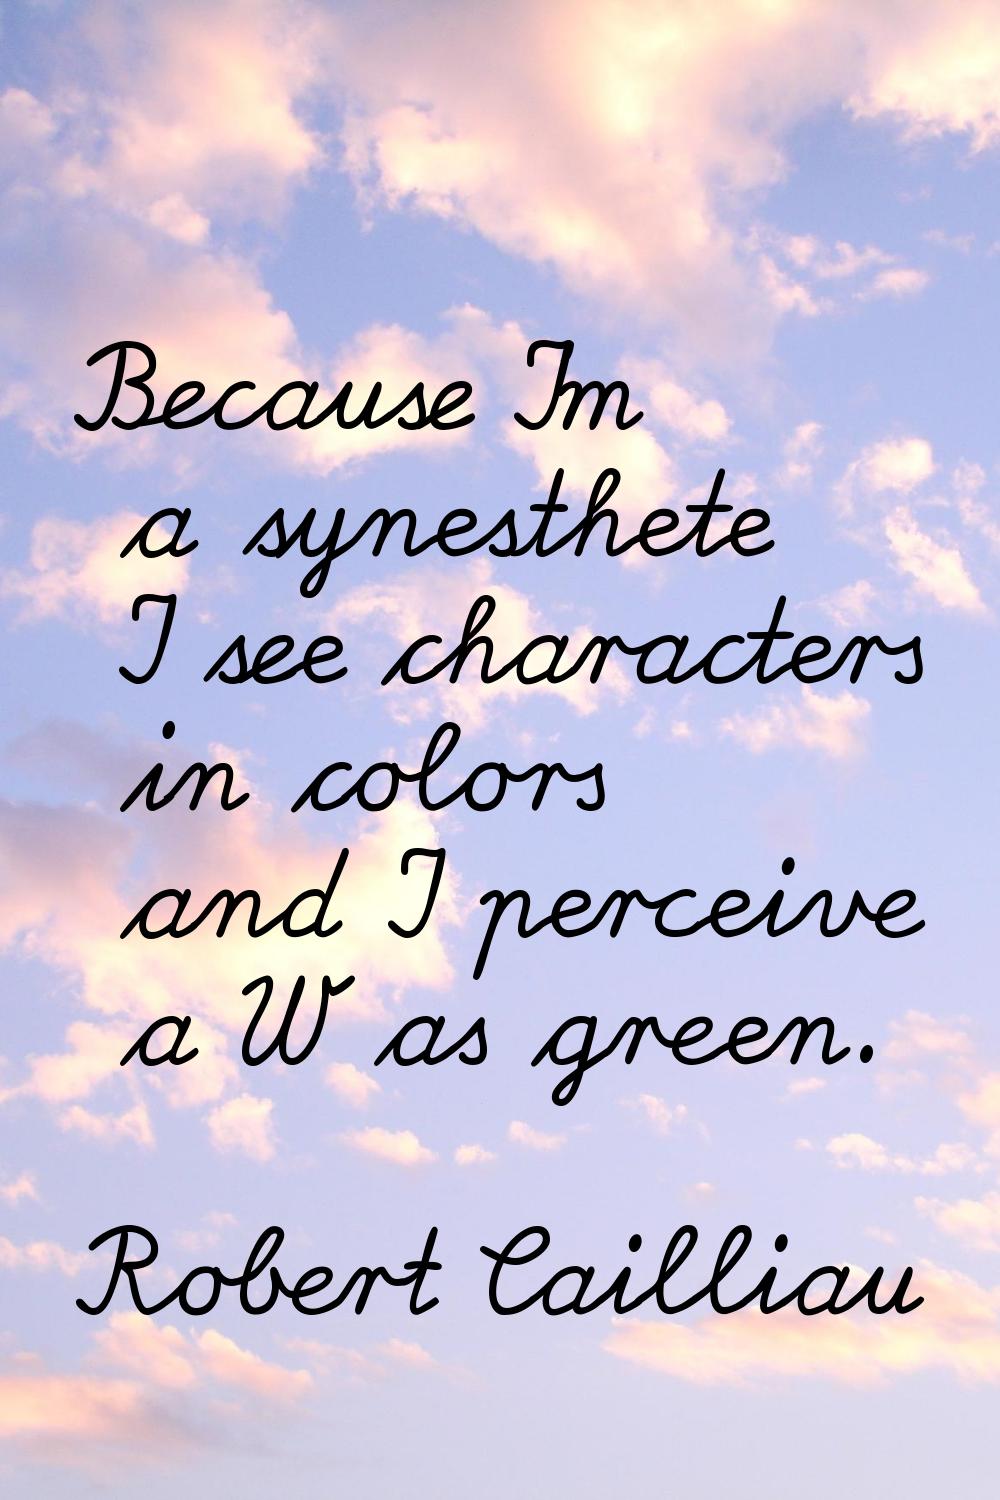 Because I'm a synesthete I see characters in colors and I perceive a W as green.